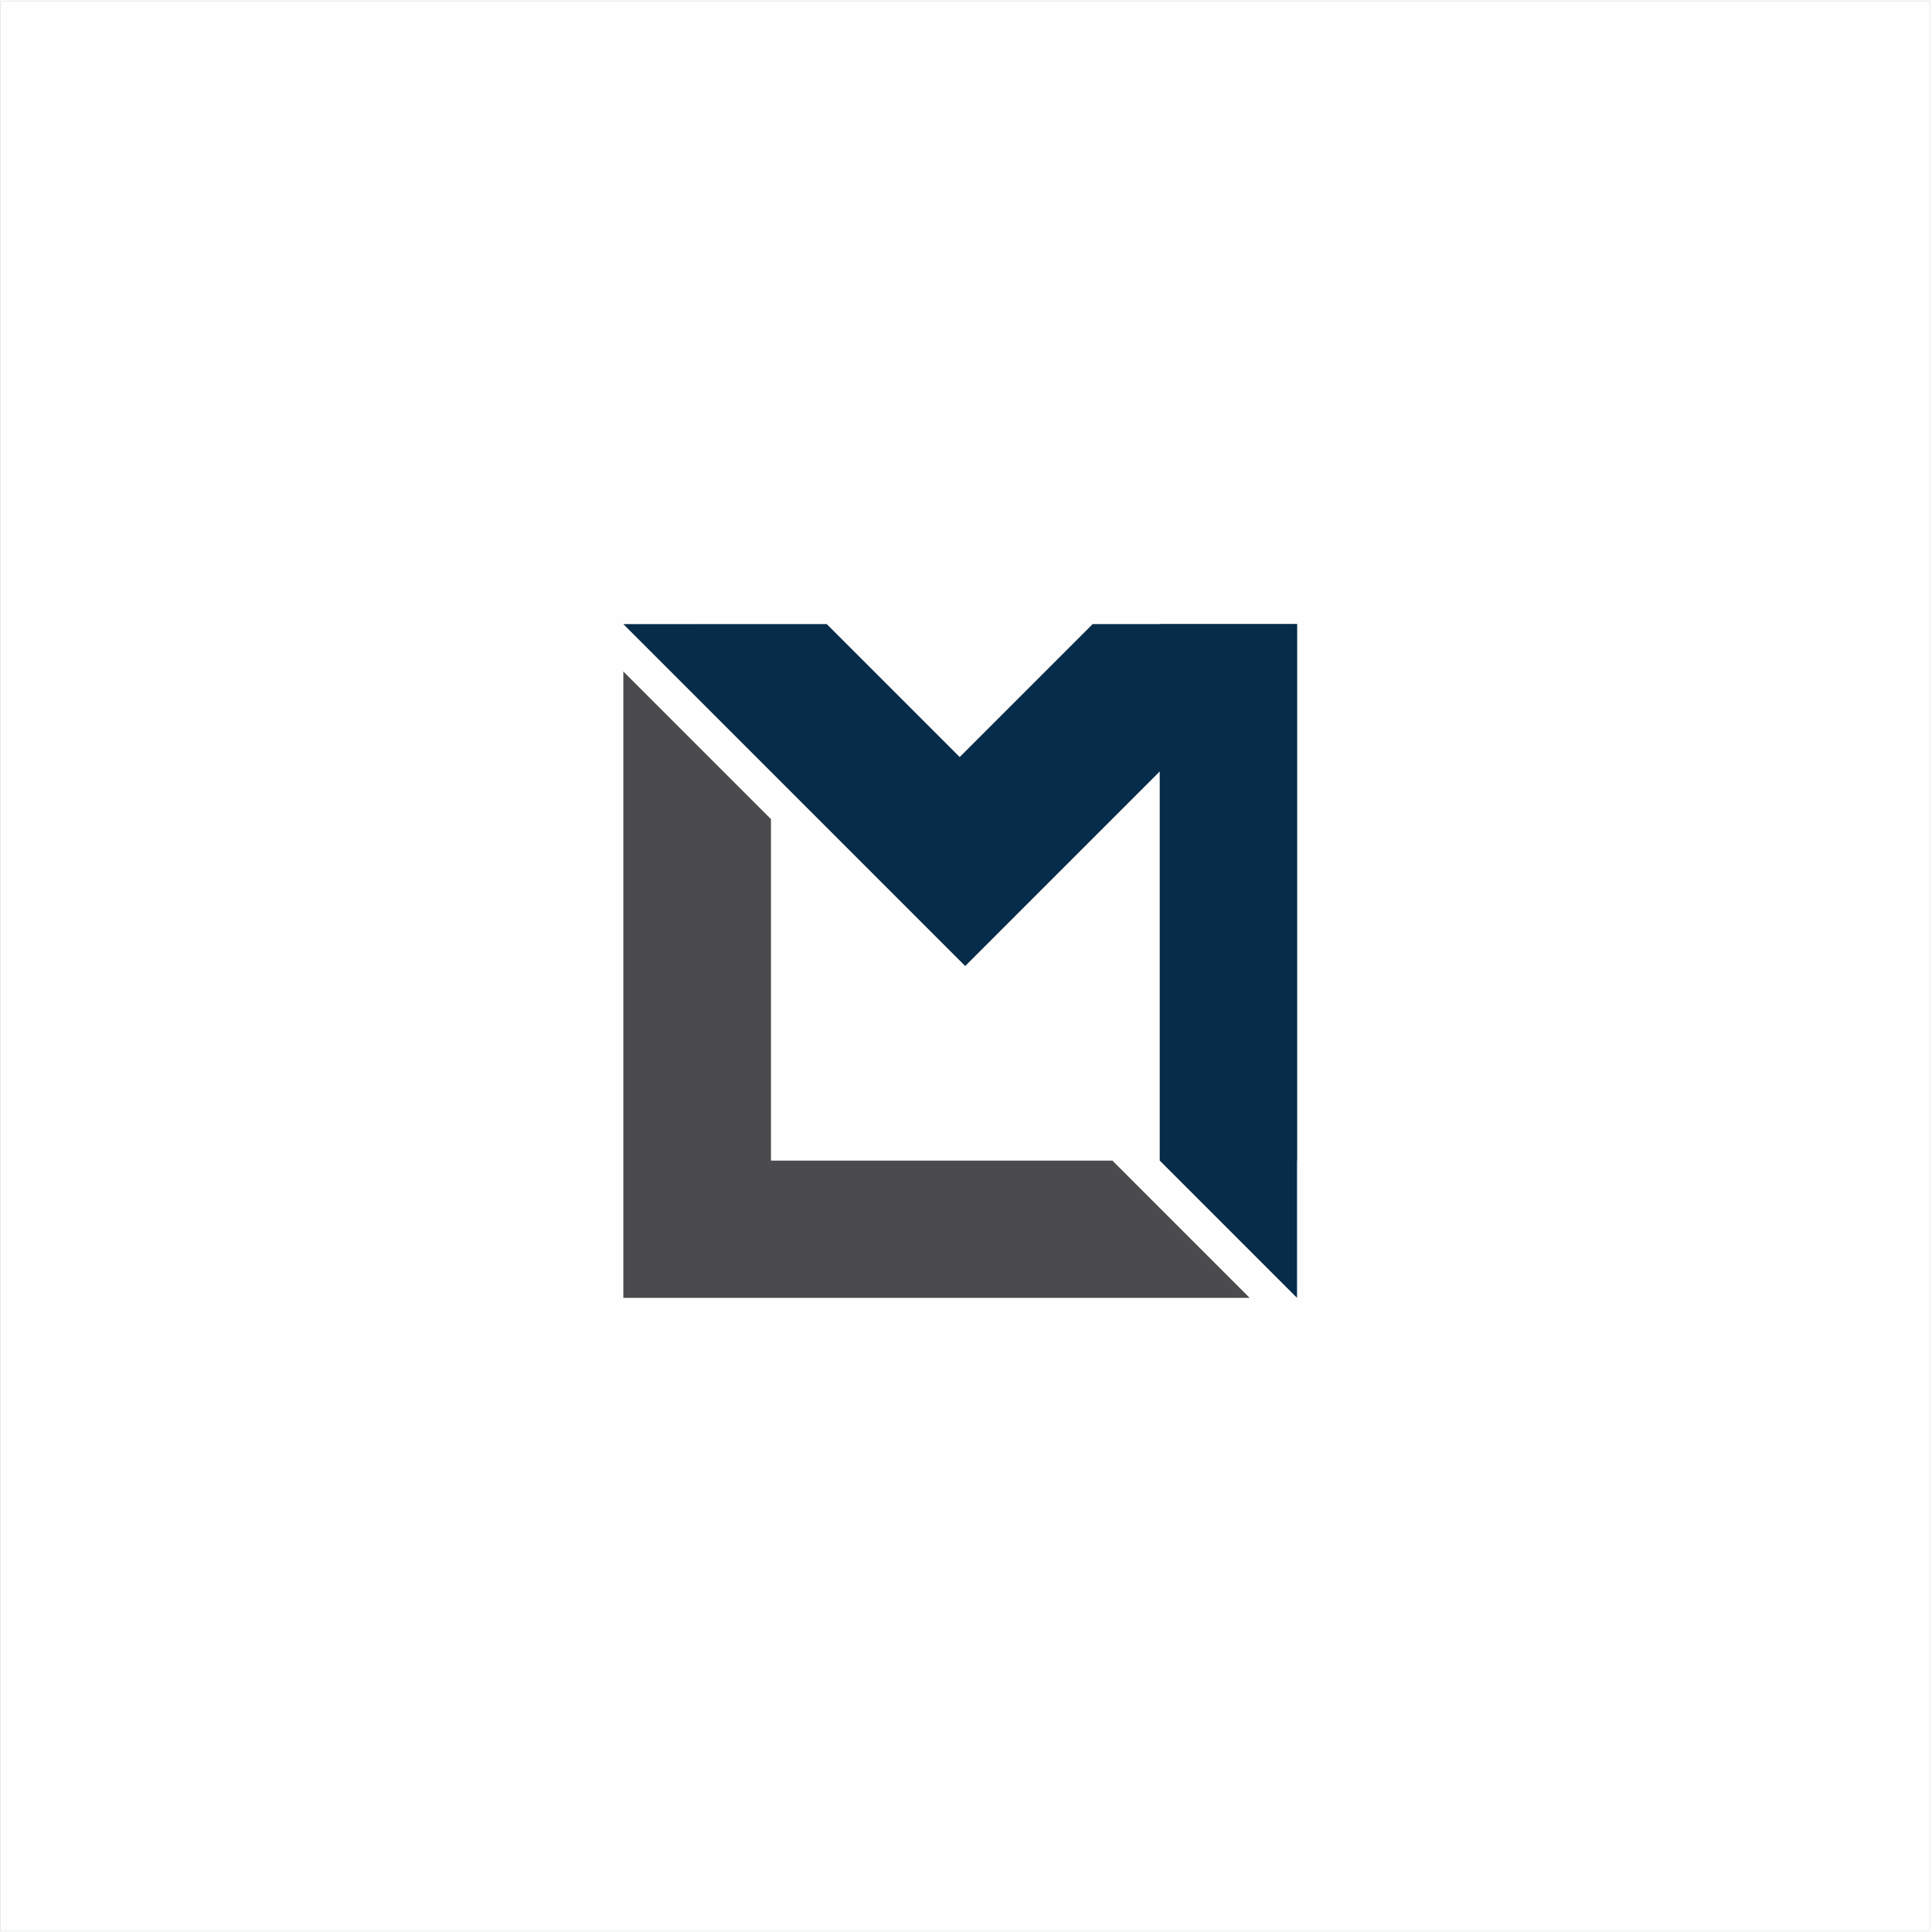 Lm Logo - Entry #1637707 | The company is called 